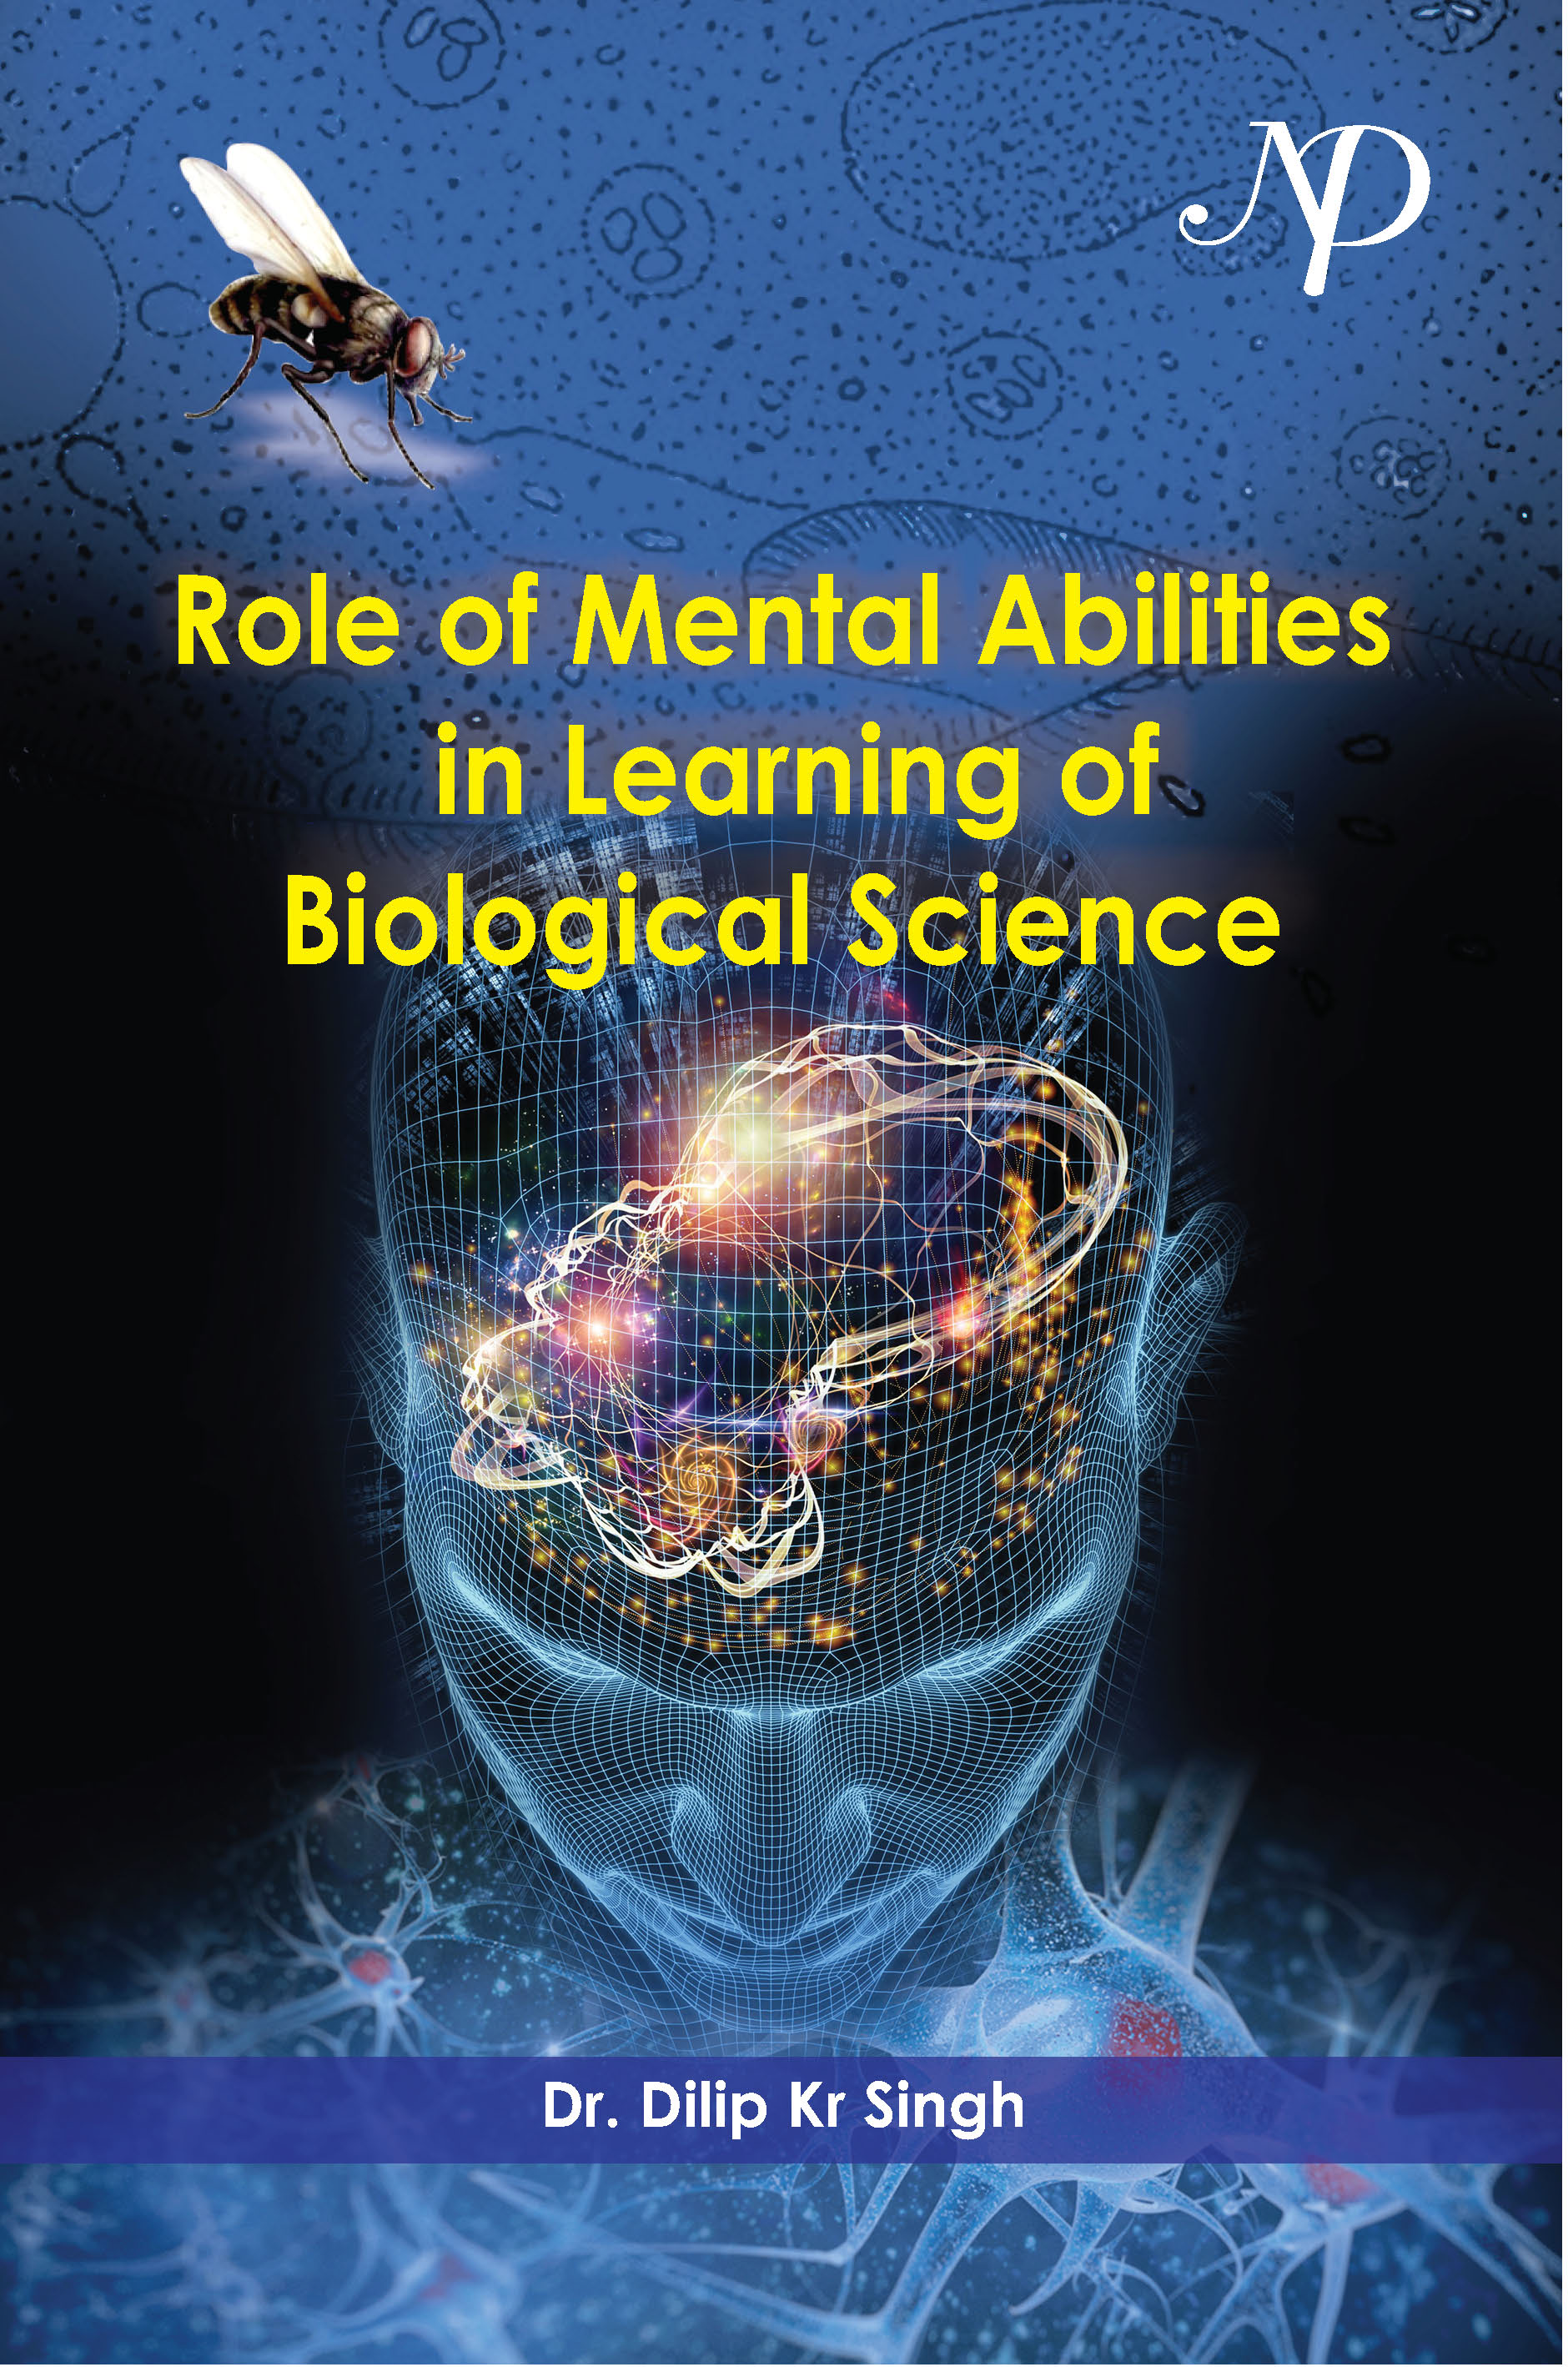 Role of Mental Abilities in learning of Biological Science